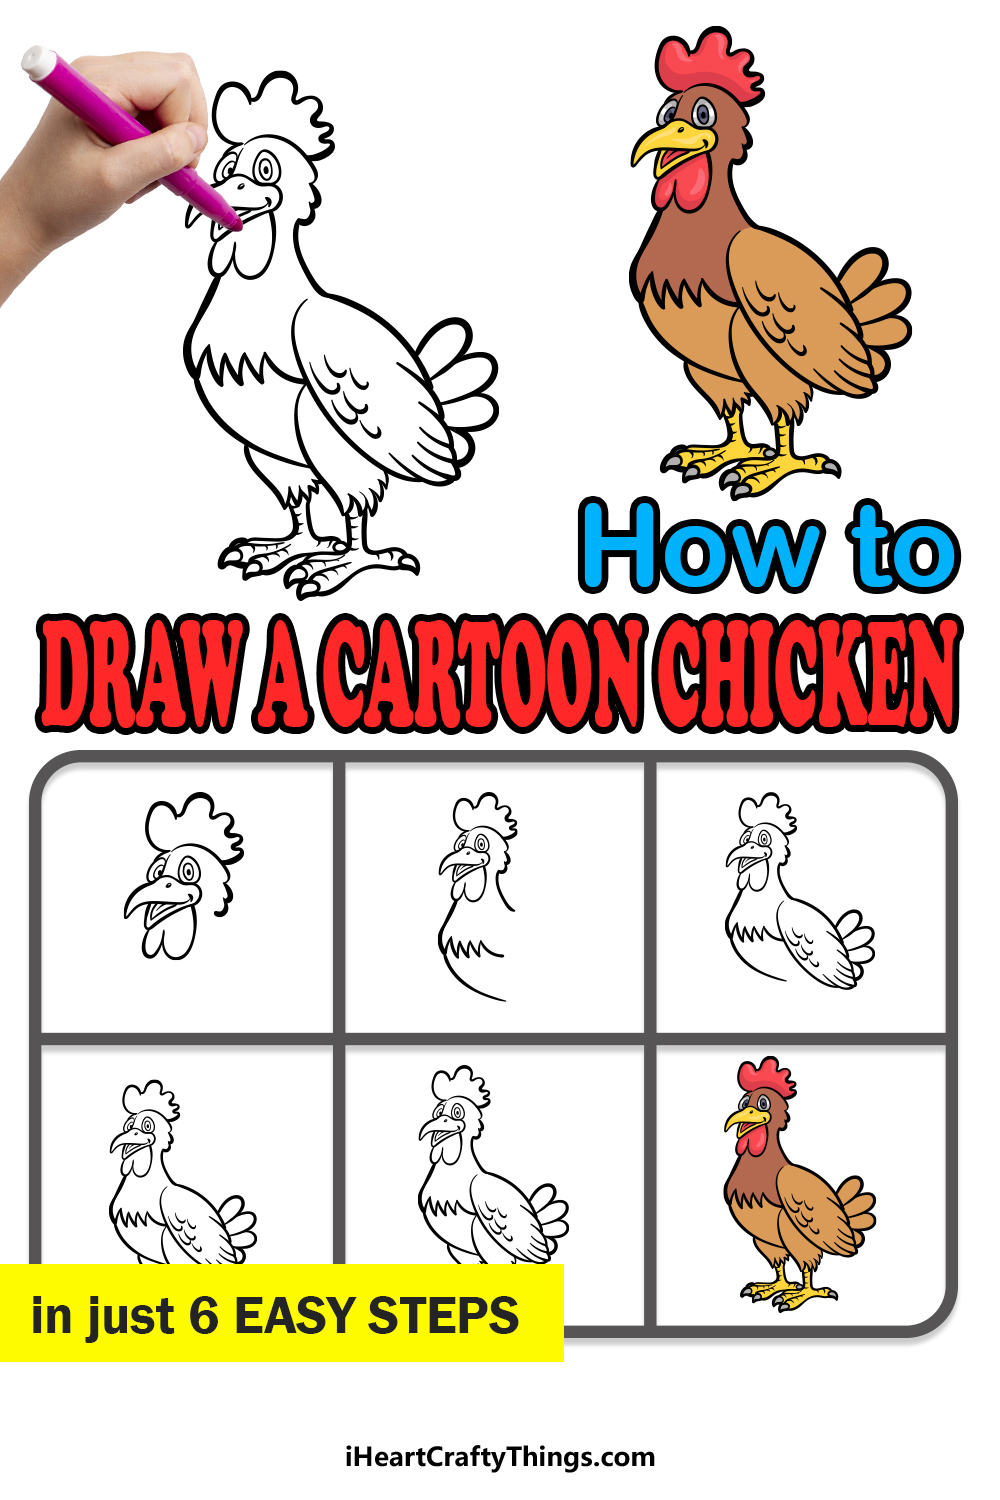 how to draw a cartoon chicken in 6 easy steps